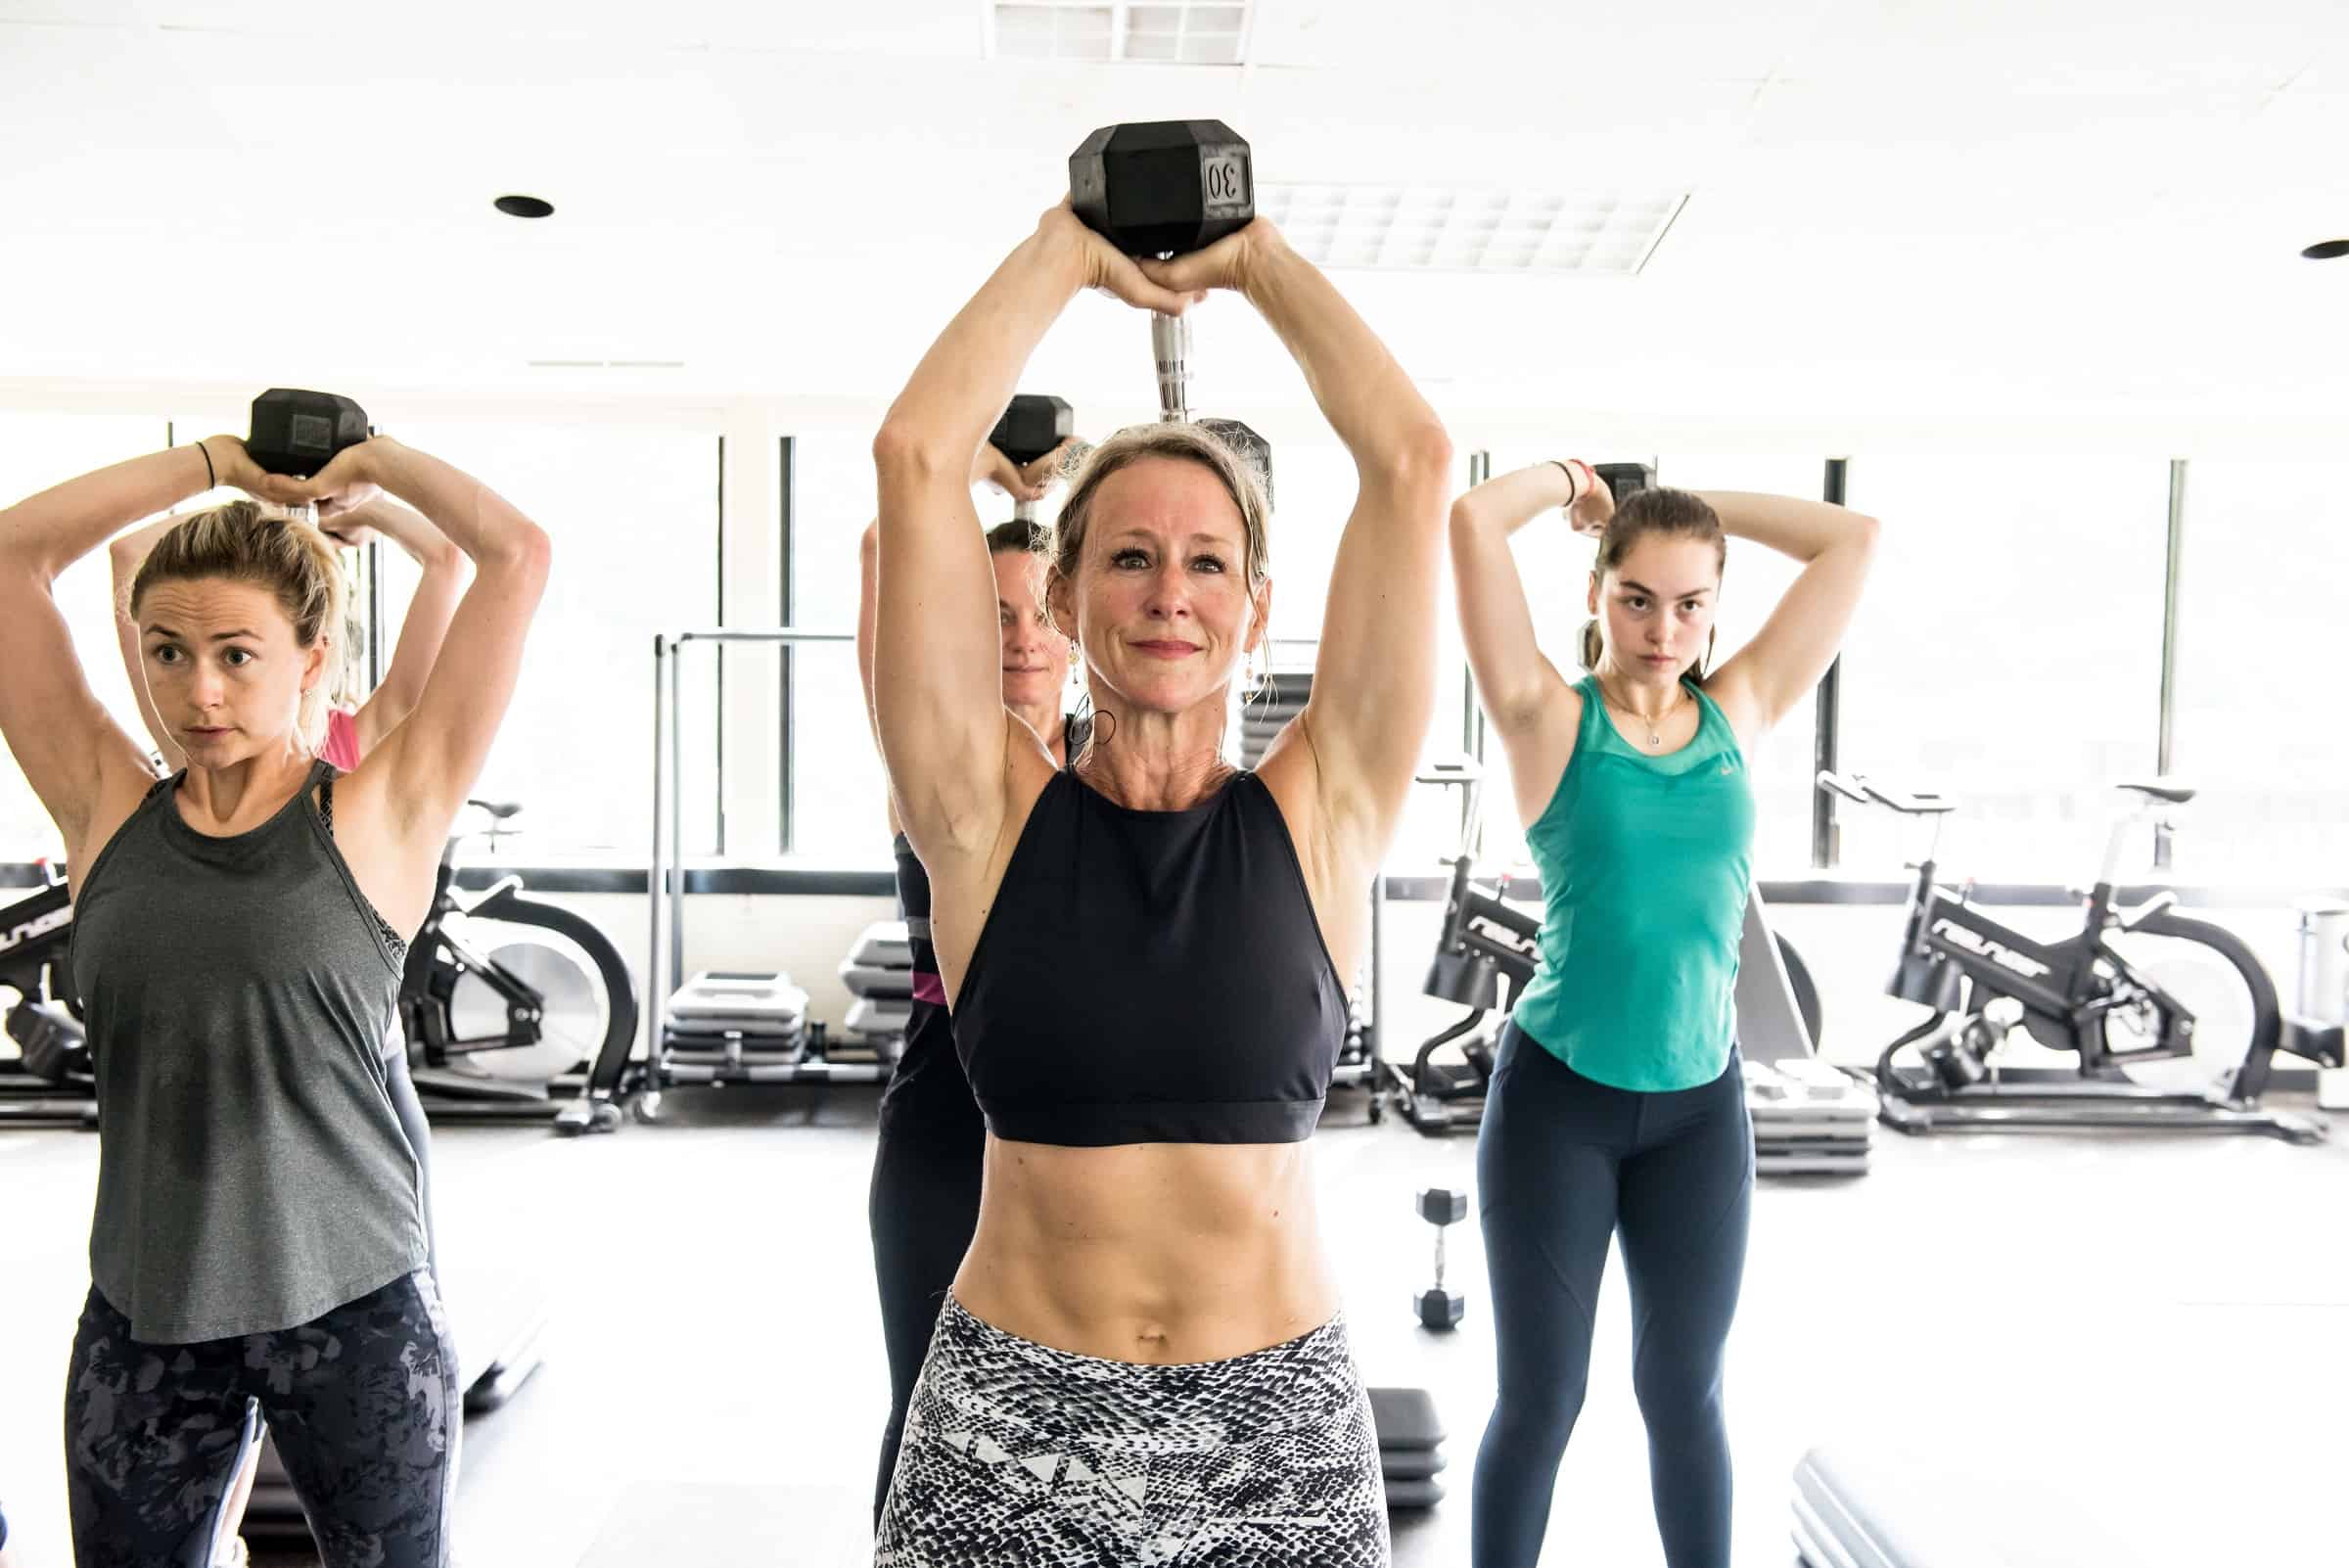 Strength training 30-60 minutes a week could be linked to longer life: study